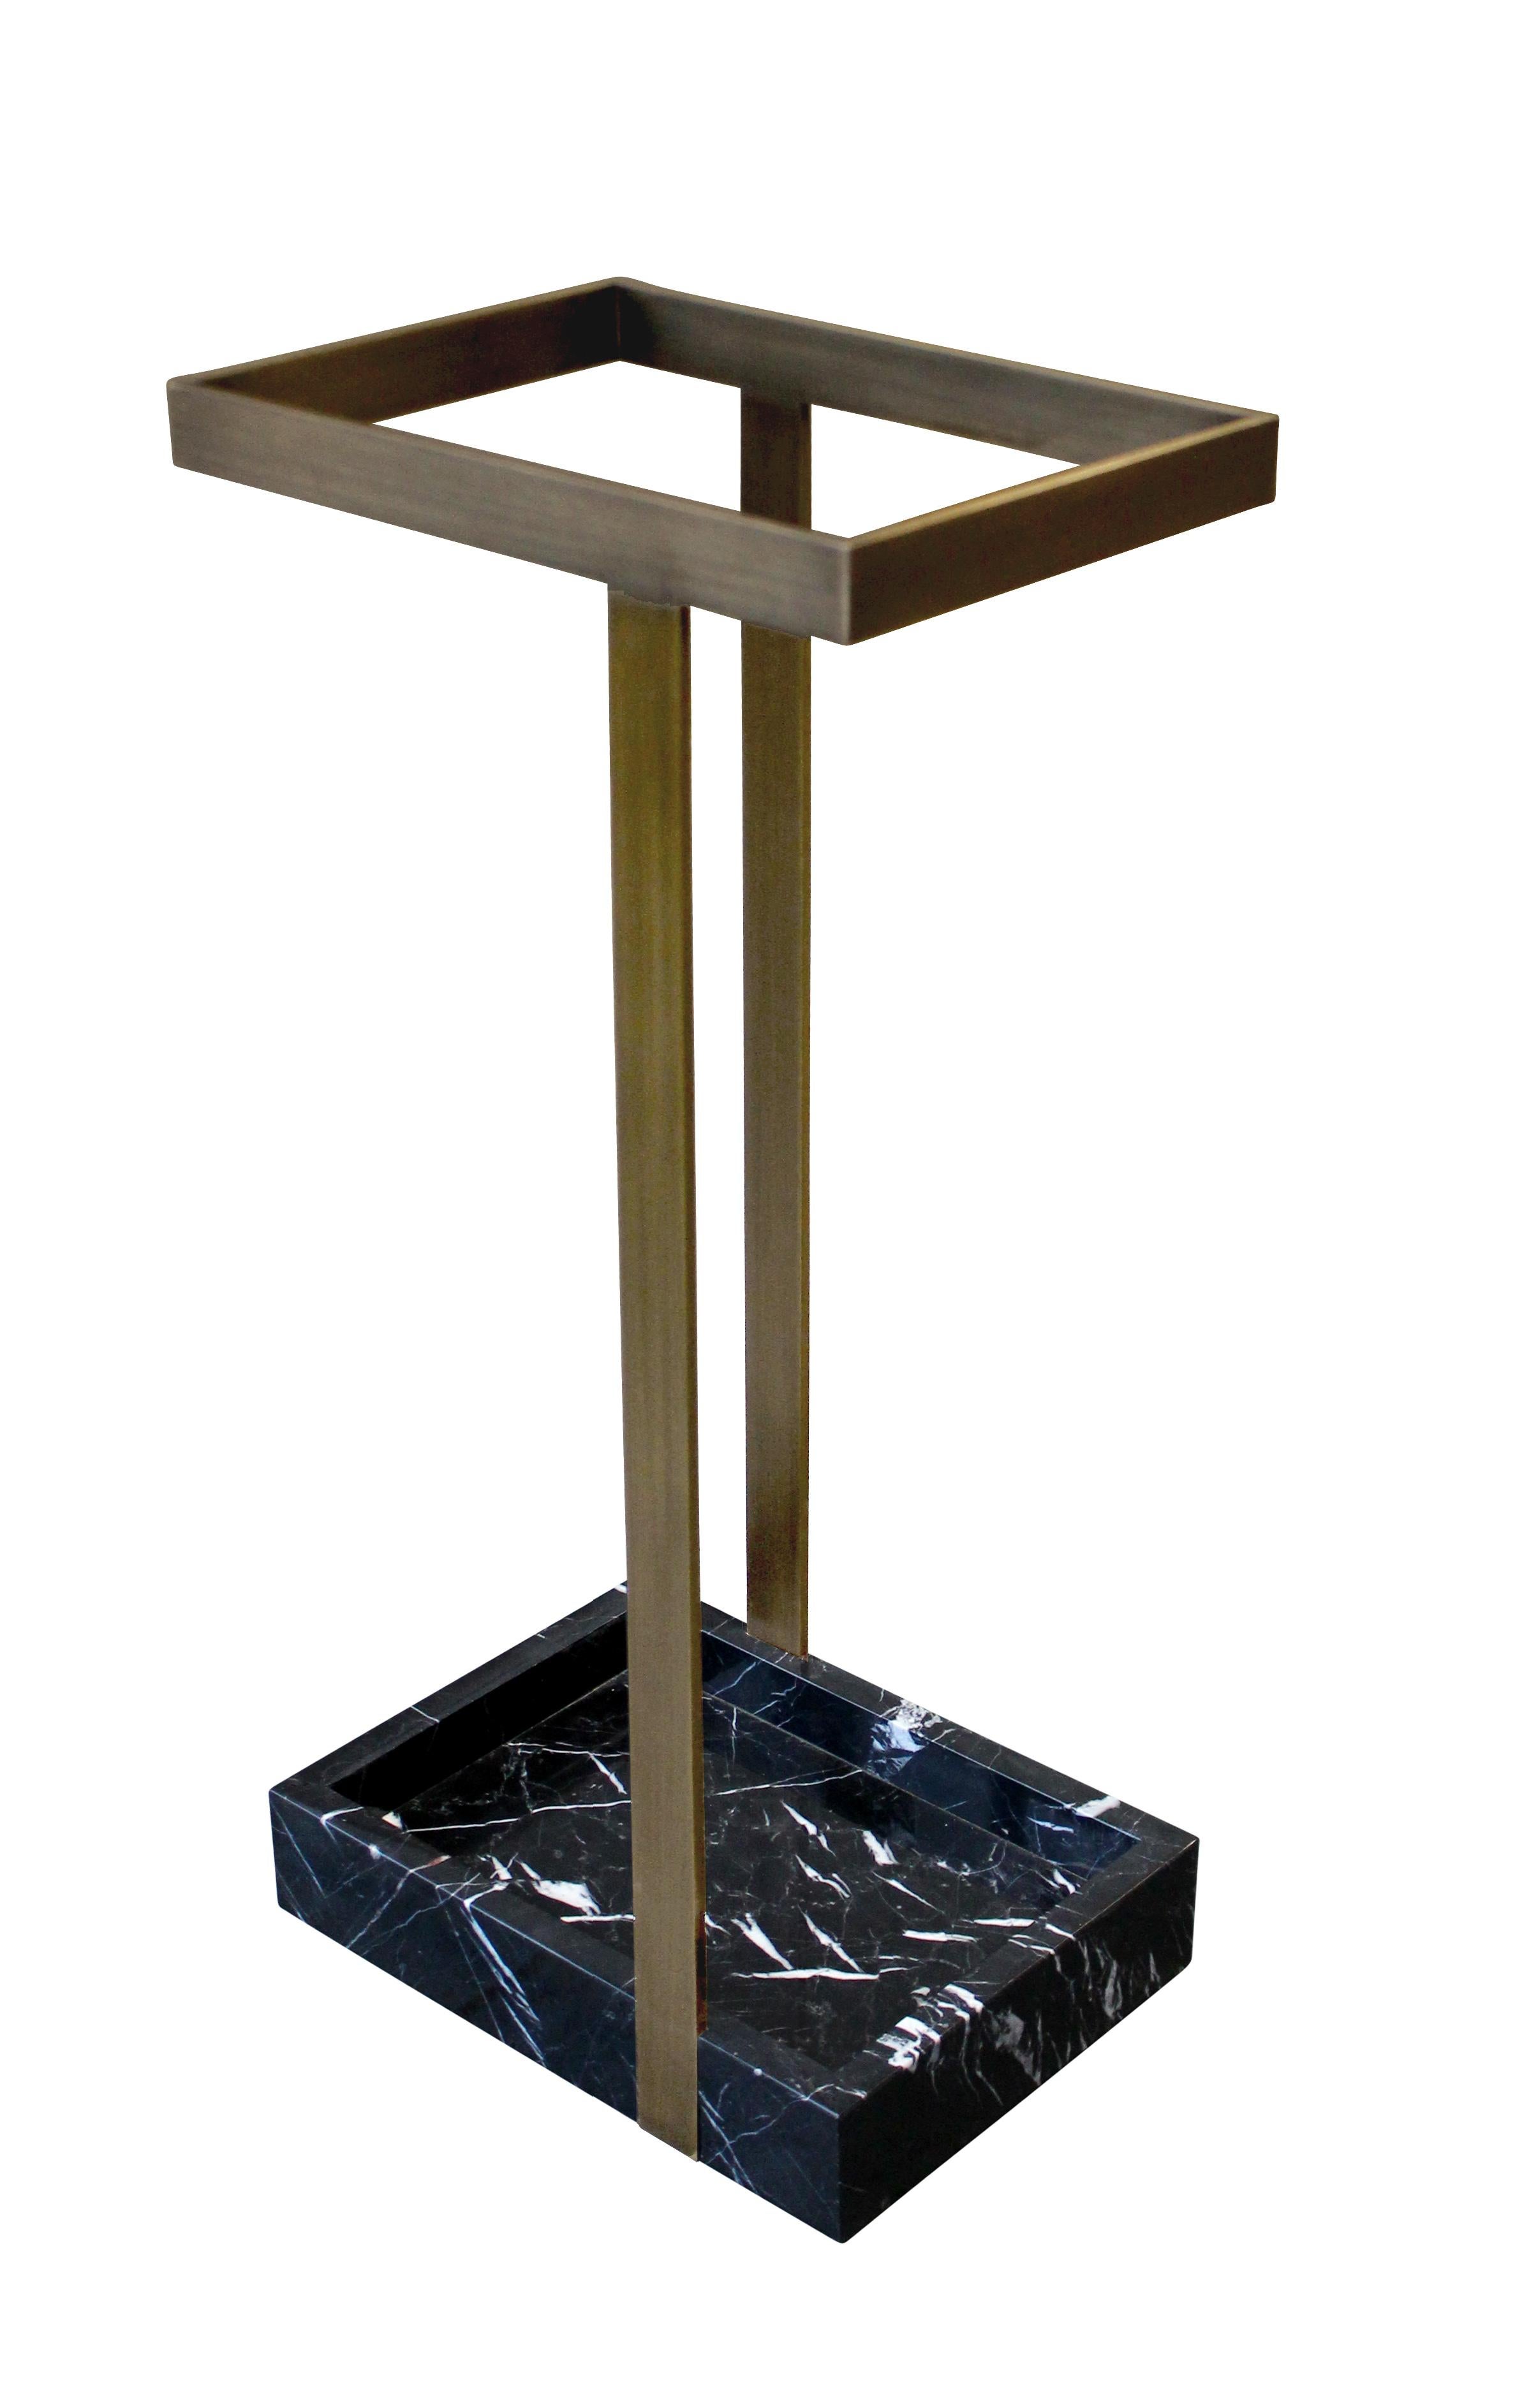 This subtle yet striking umbrella stand creates an arresting focal point in a foyer or vestibule. Shown here in patinated bronze with nero marquina marble, the piece is handmade to order in New York City and can be specified in any number of custom